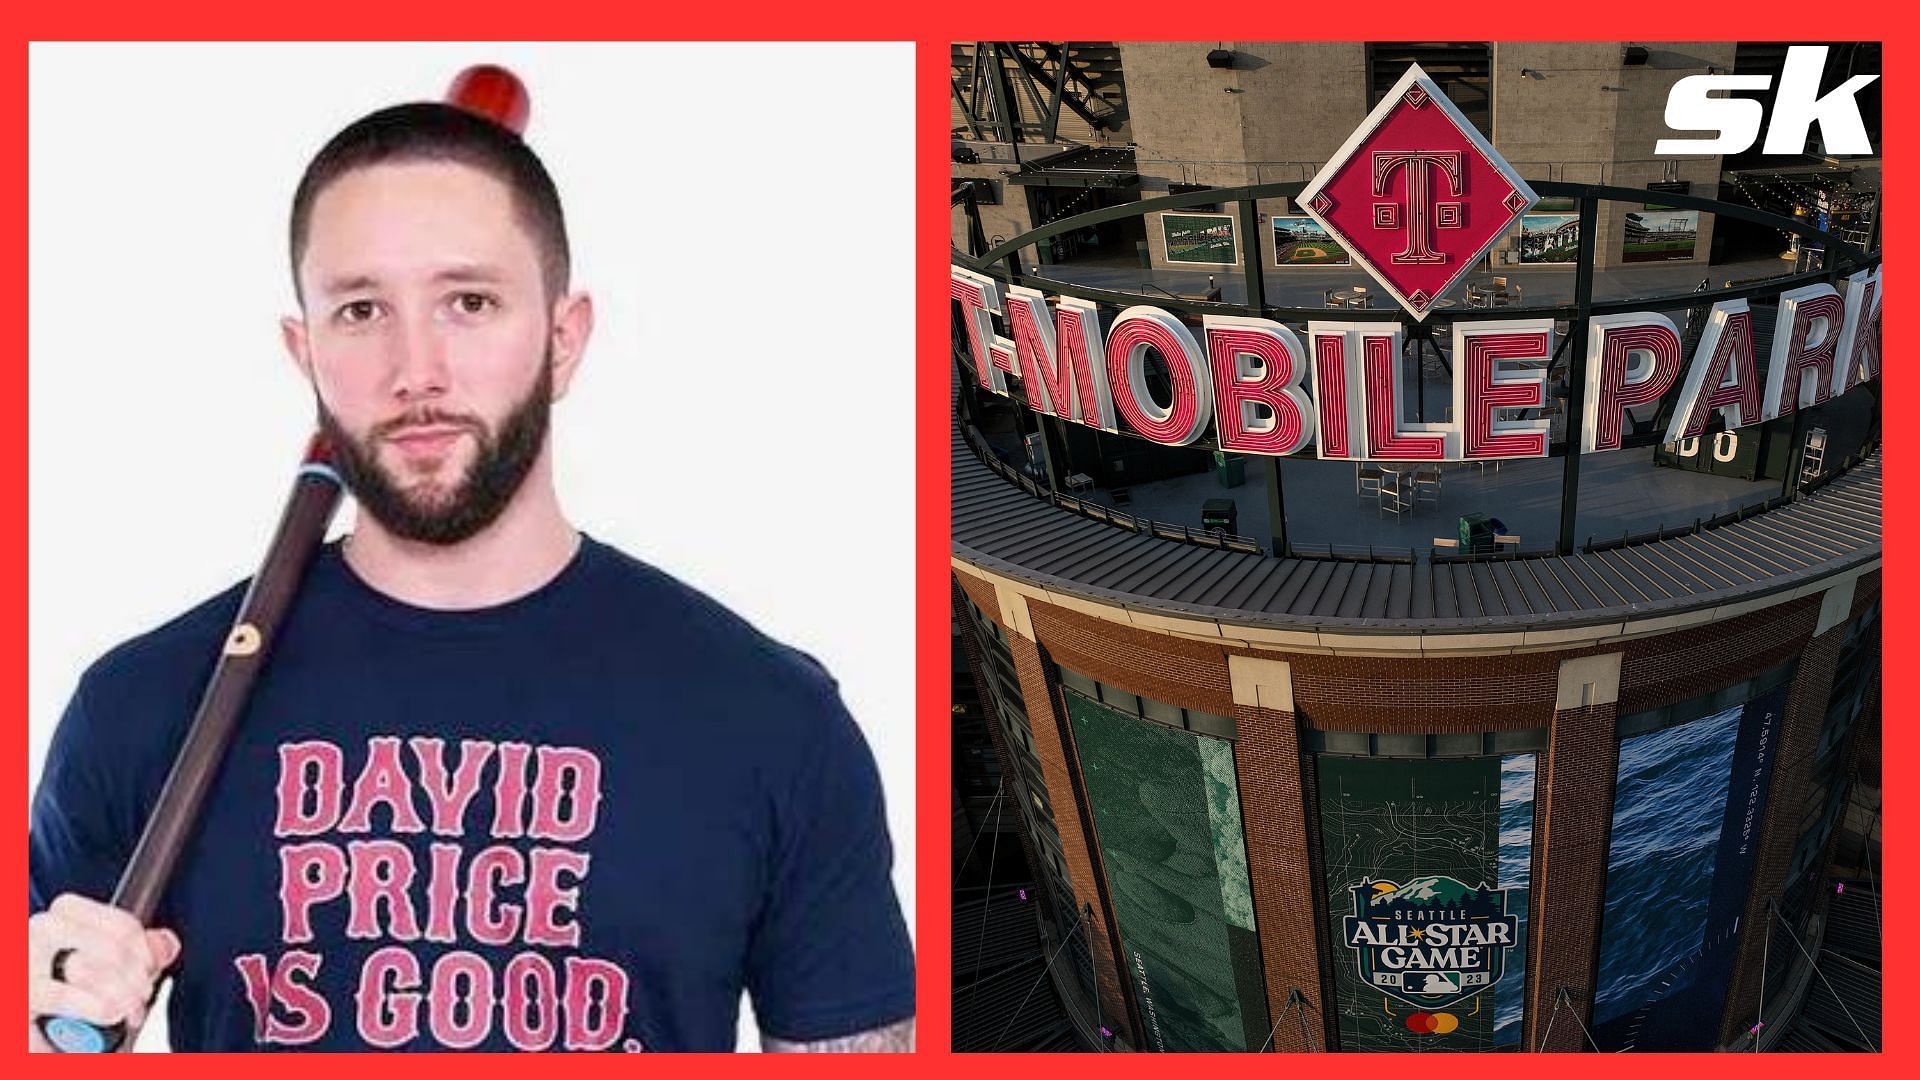 Jared Carrabis is looking forward more the MLB Draft than the All-Star game